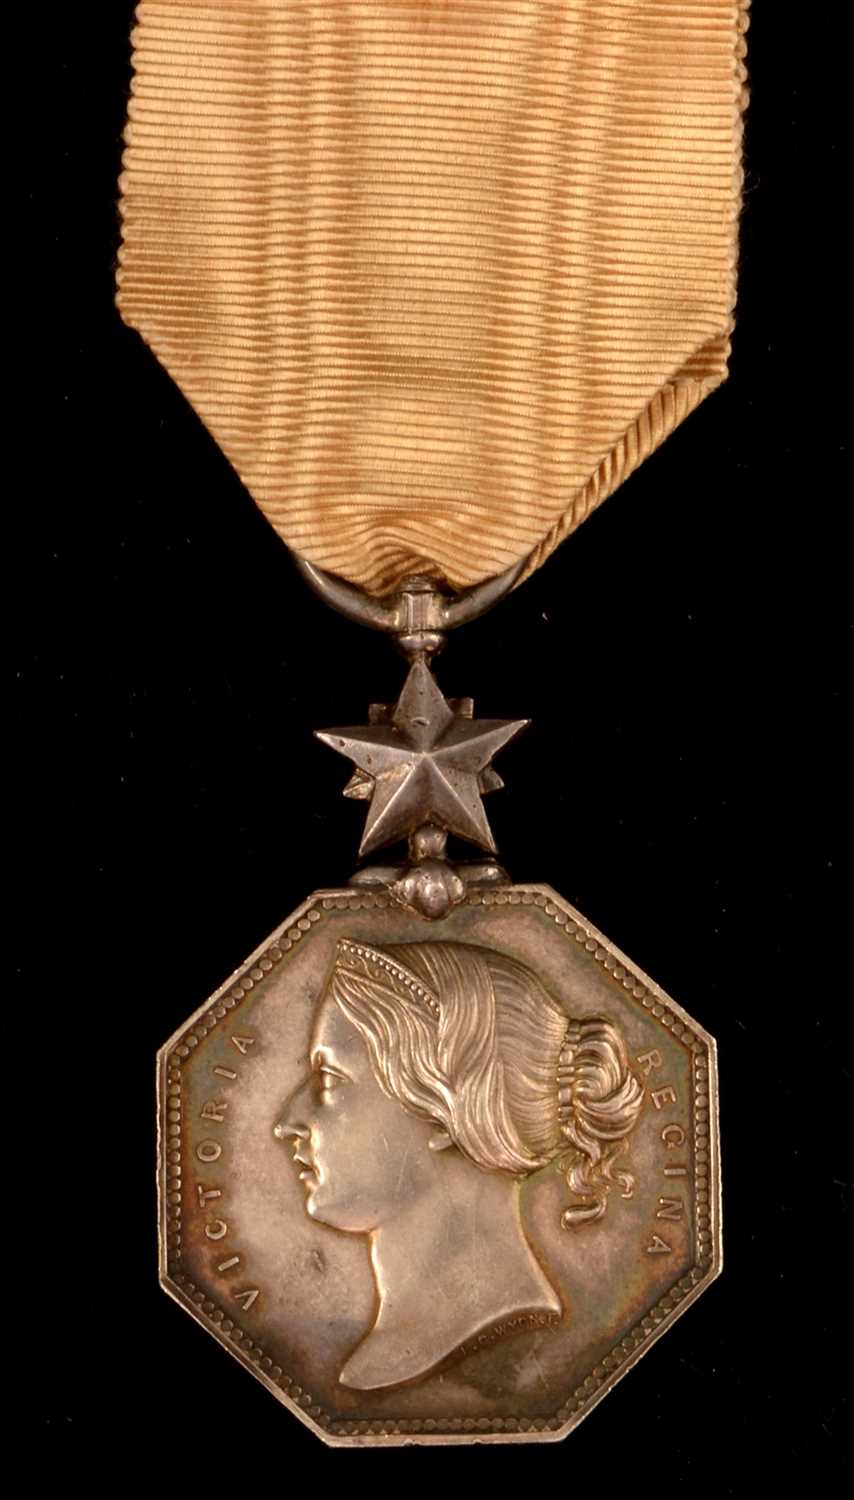 1845 - Arctic Discoveries medal